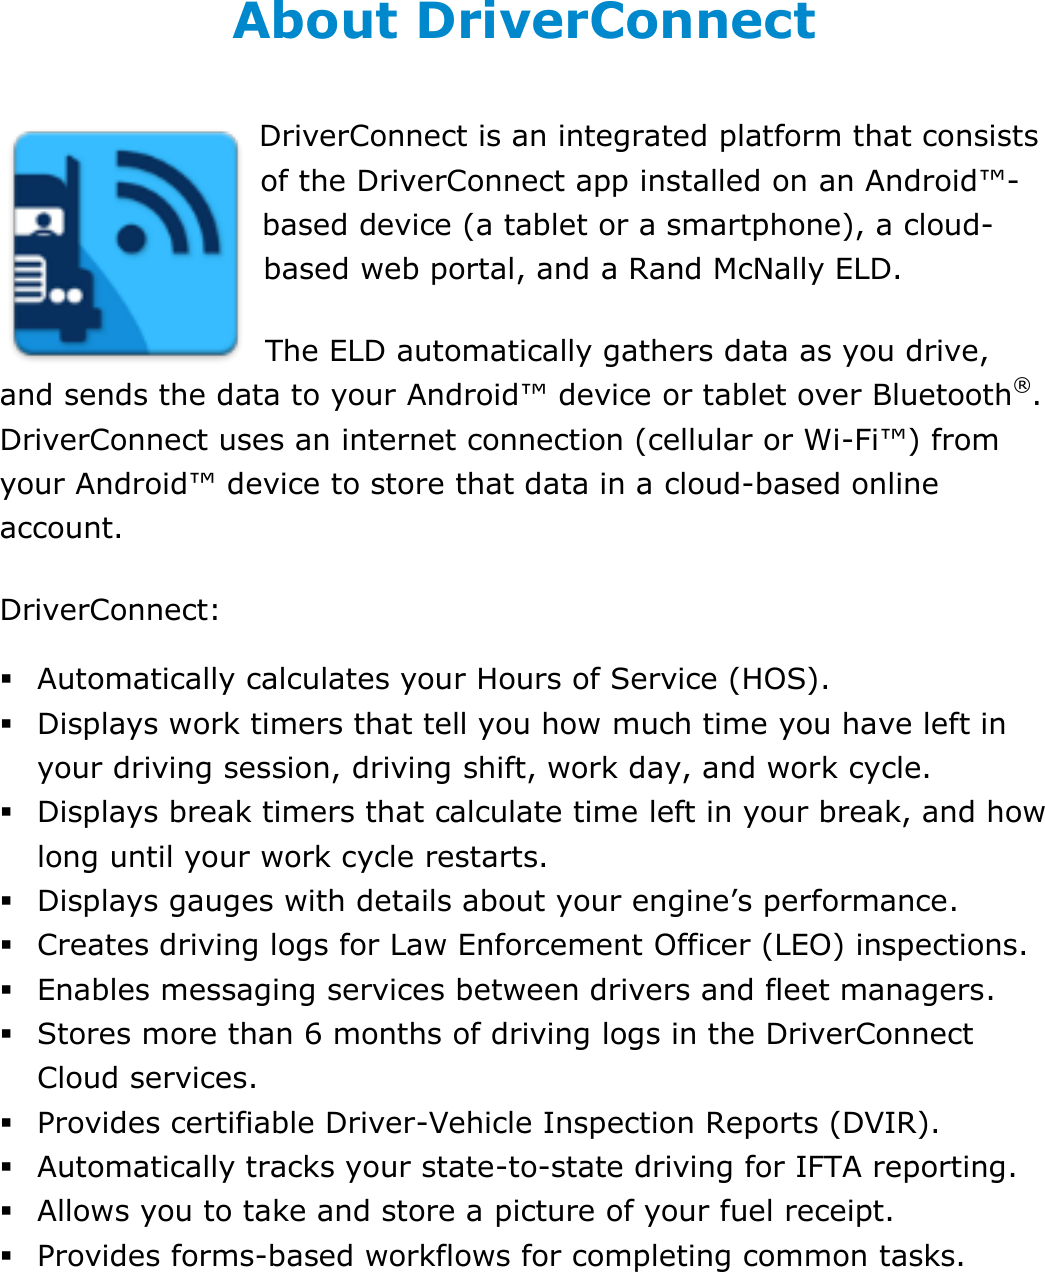 About This Guide DriverConnect User Guide  5 © 2016-2017, Rand McNally, Inc. About DriverConnect DriverConnect is an integrated platform that consists of the DriverConnect app installed on an Android™-based device (a tablet or a smartphone), a cloud-based web portal, and a Rand McNally ELD. The ELD automatically gathers data as you drive, and sends the data to your Android™ device or tablet over Bluetooth®. DriverConnect uses an internet connection (cellular or Wi-Fi™) from your Android™ device to store that data in a cloud-based online account. DriverConnect:  Automatically calculates your Hours of Service (HOS).  Displays work timers that tell you how much time you have left in your driving session, driving shift, work day, and work cycle.  Displays break timers that calculate time left in your break, and how long until your work cycle restarts.  Displays gauges with details about your engine’s performance.  Creates driving logs for Law Enforcement Officer (LEO) inspections.  Enables messaging services between drivers and fleet managers.  Stores more than 6 months of driving logs in the DriverConnect Cloud services.  Provides certifiable Driver-Vehicle Inspection Reports (DVIR).  Automatically tracks your state-to-state driving for IFTA reporting.  Allows you to take and store a picture of your fuel receipt.  Provides forms-based workflows for completing common tasks.   